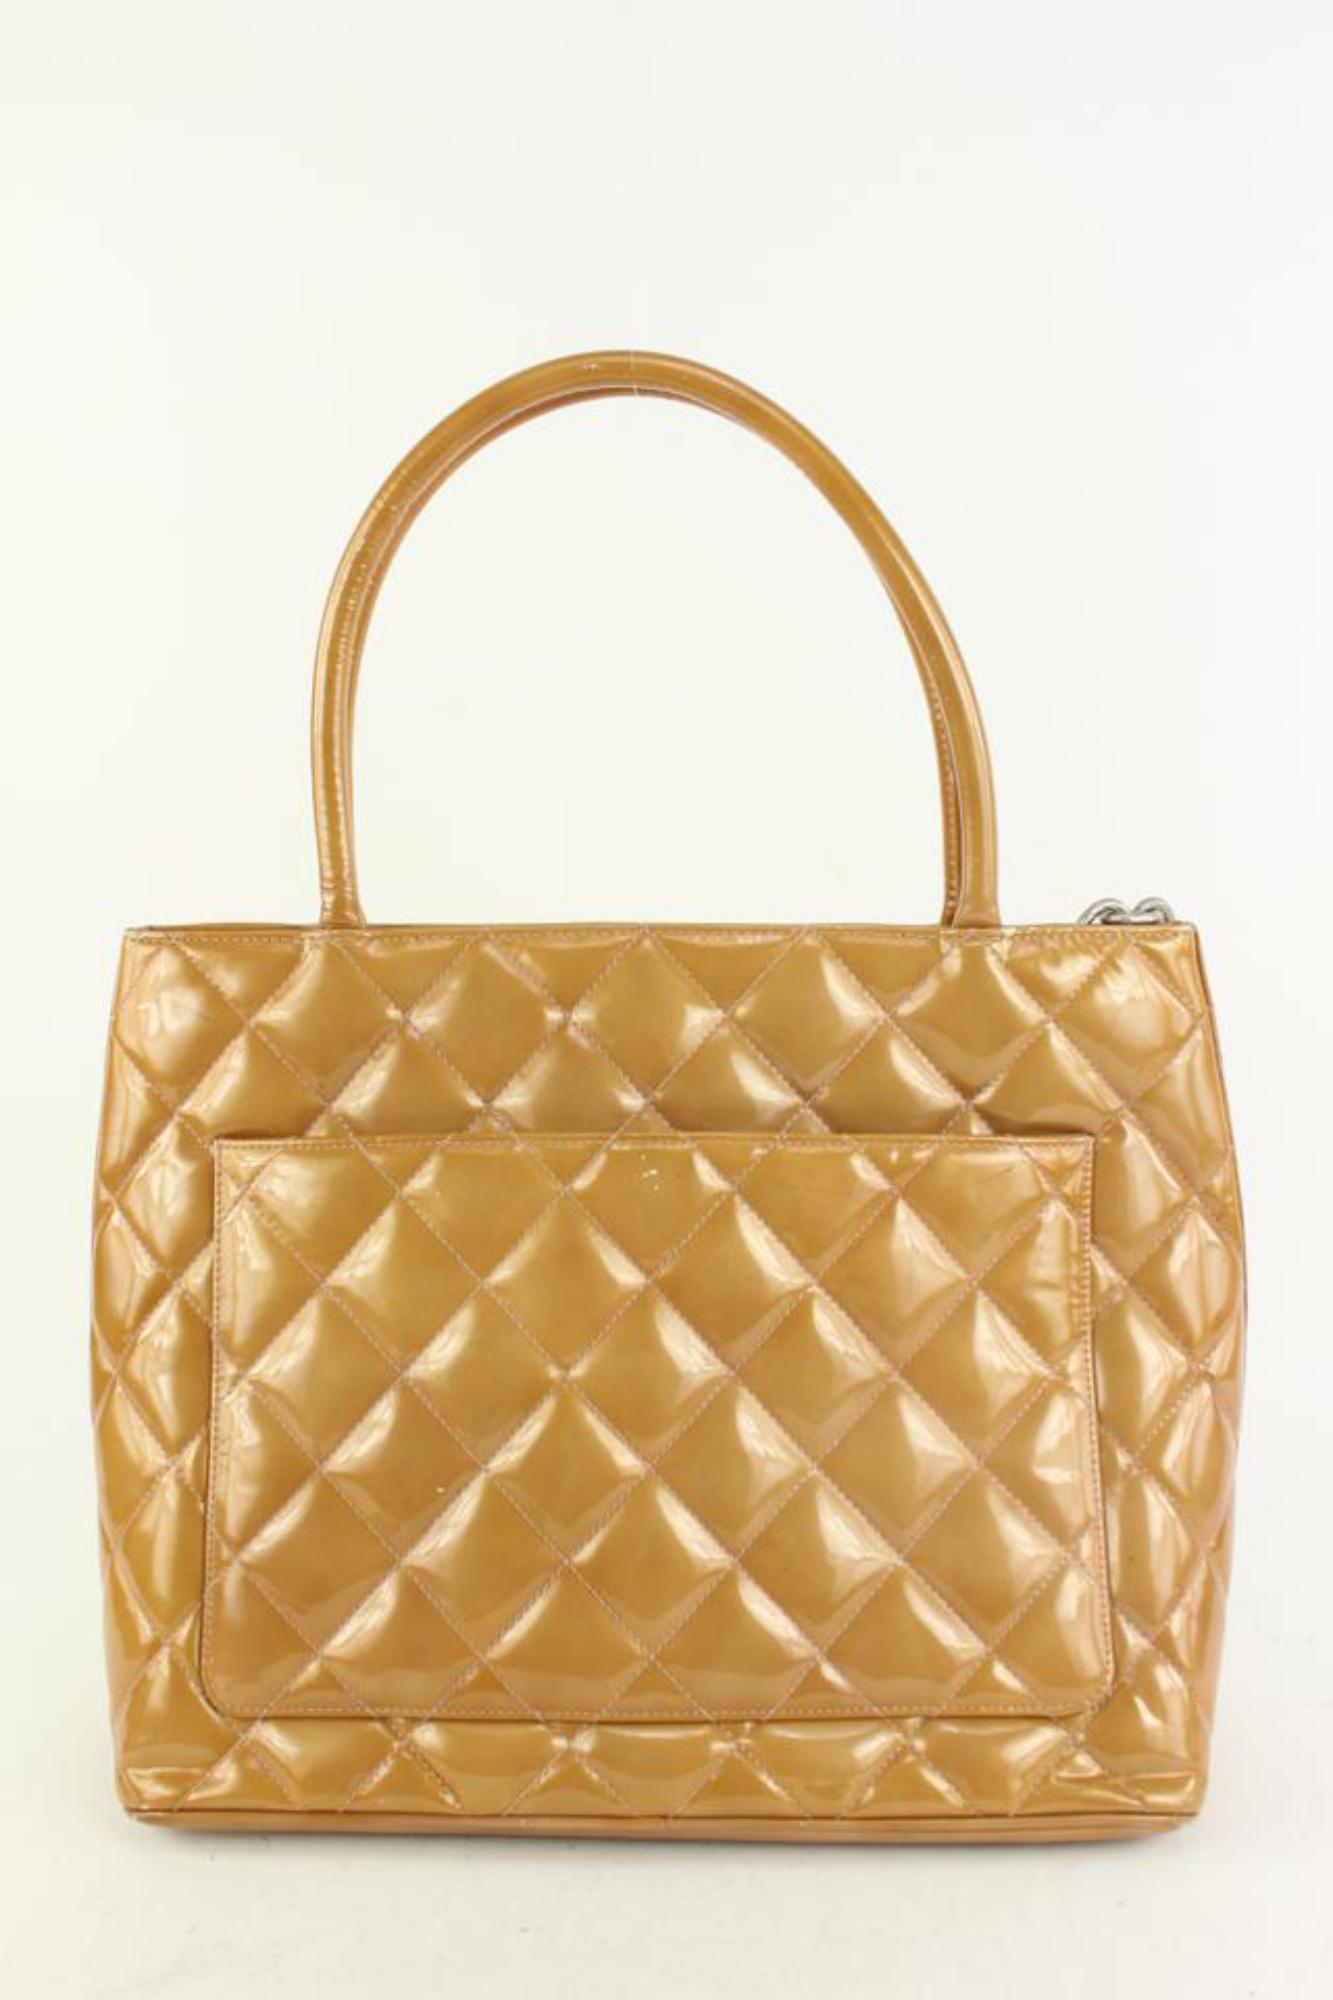 Women's Chanel Burnt Orange Quilted Patent Medallion Tote Bag 119c41